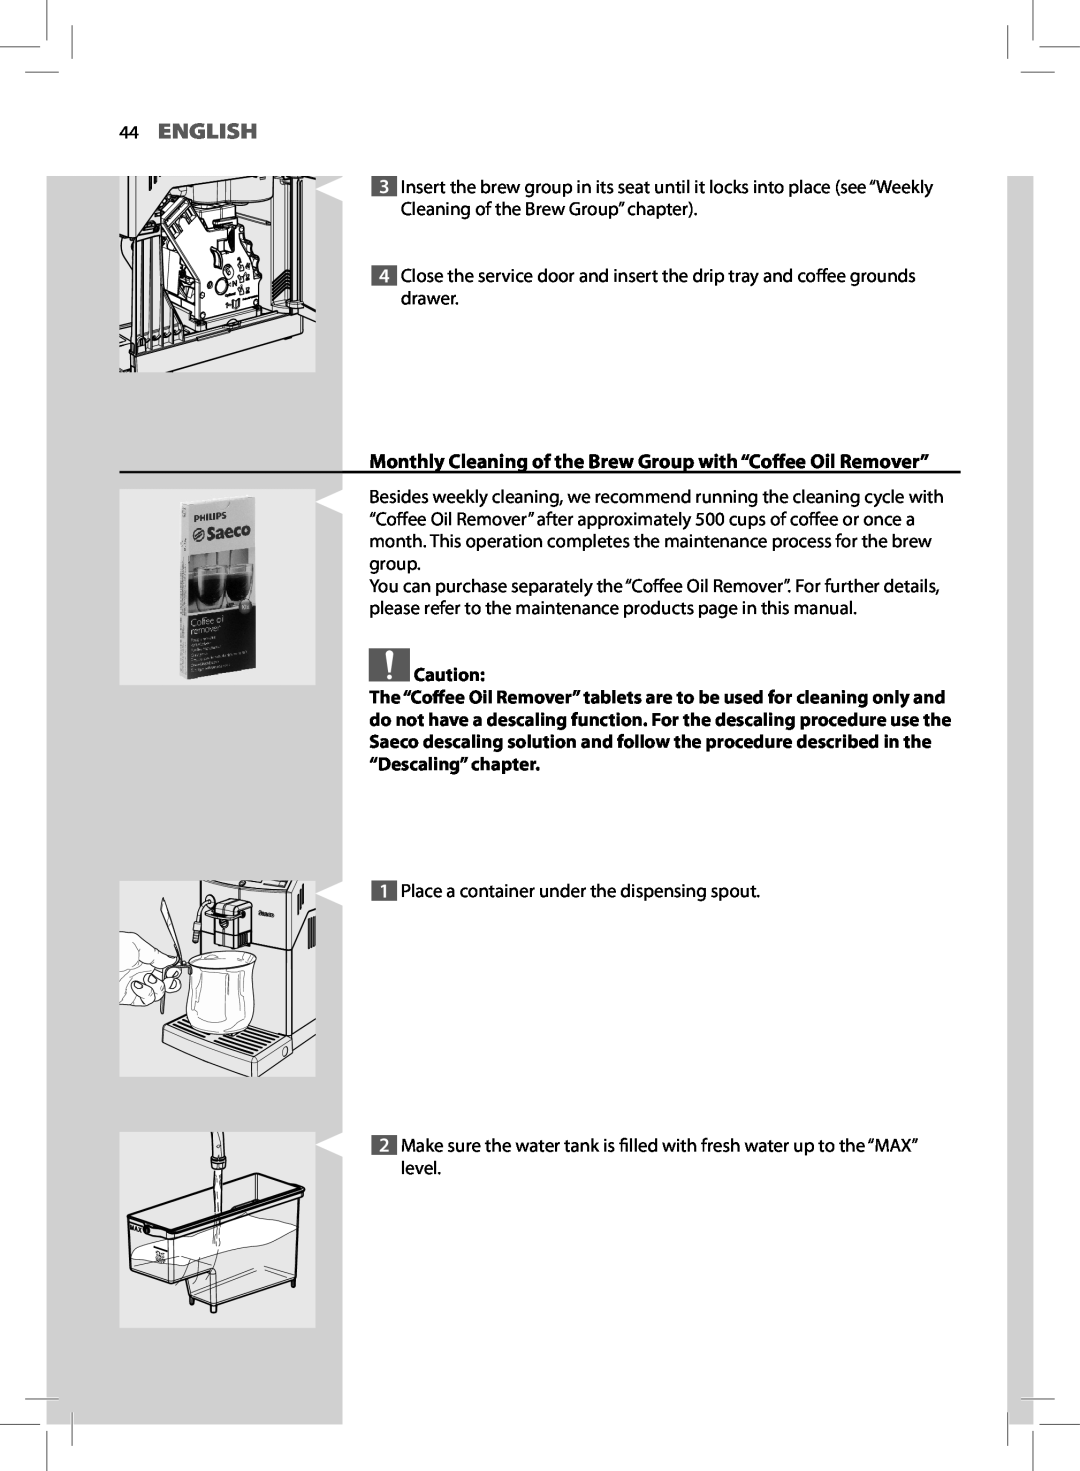 Saeco Coffee Makers HD8772 user manual English, Monthly Cleaning of the Brew Group with “Coffee Oil Remover” 